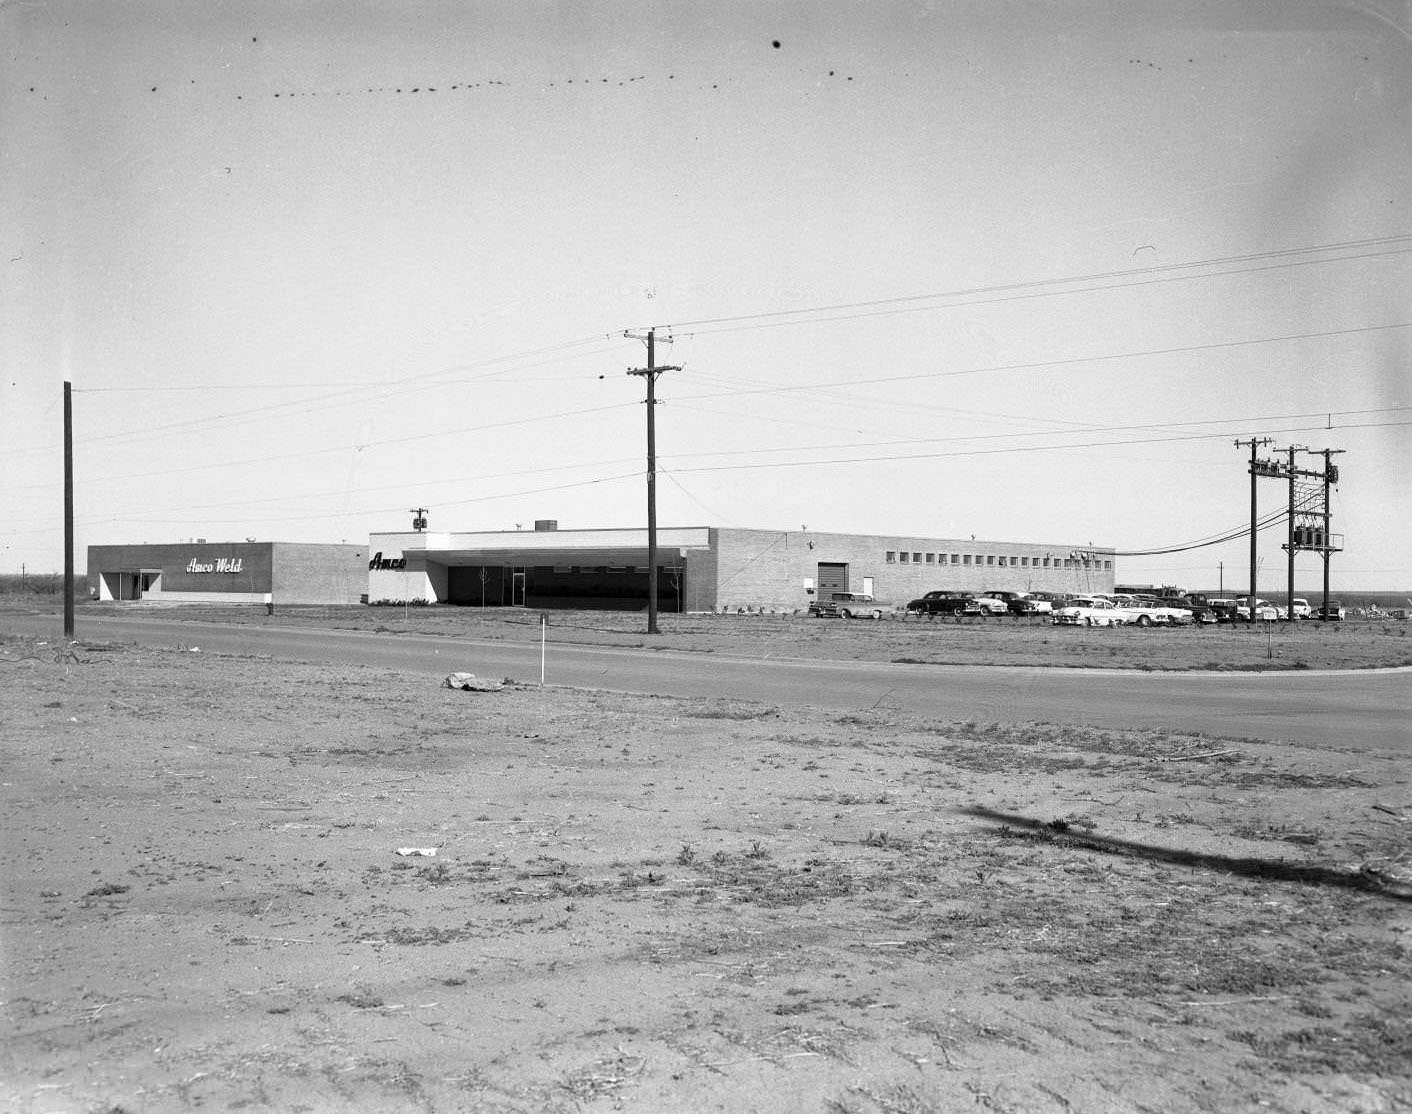 Two Amco buildings on West N. 1st Street in Abilene, 1958. The buildings are viewed from across a street, and there are cars parked beside them and power lines around them.